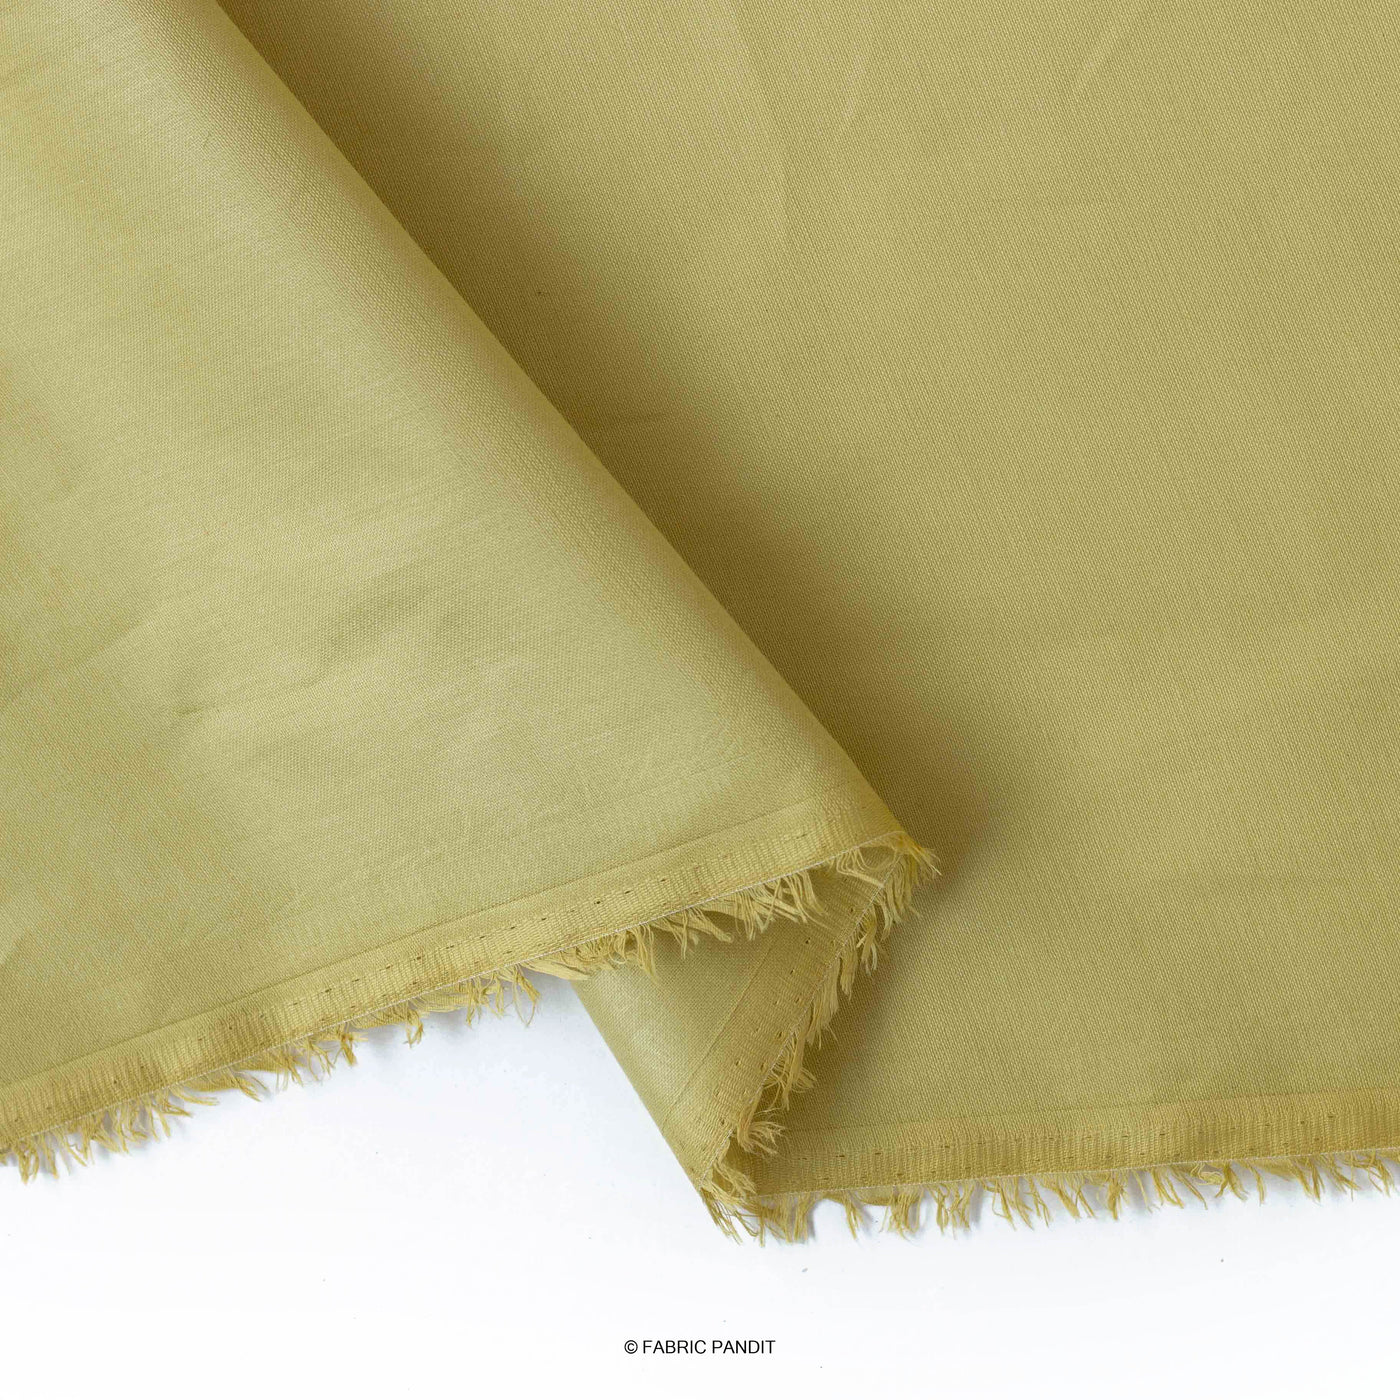 Fabric Pandit Fabric Dusty Green Color Plain Cotton Satin Fabric (Width 42 Inches)